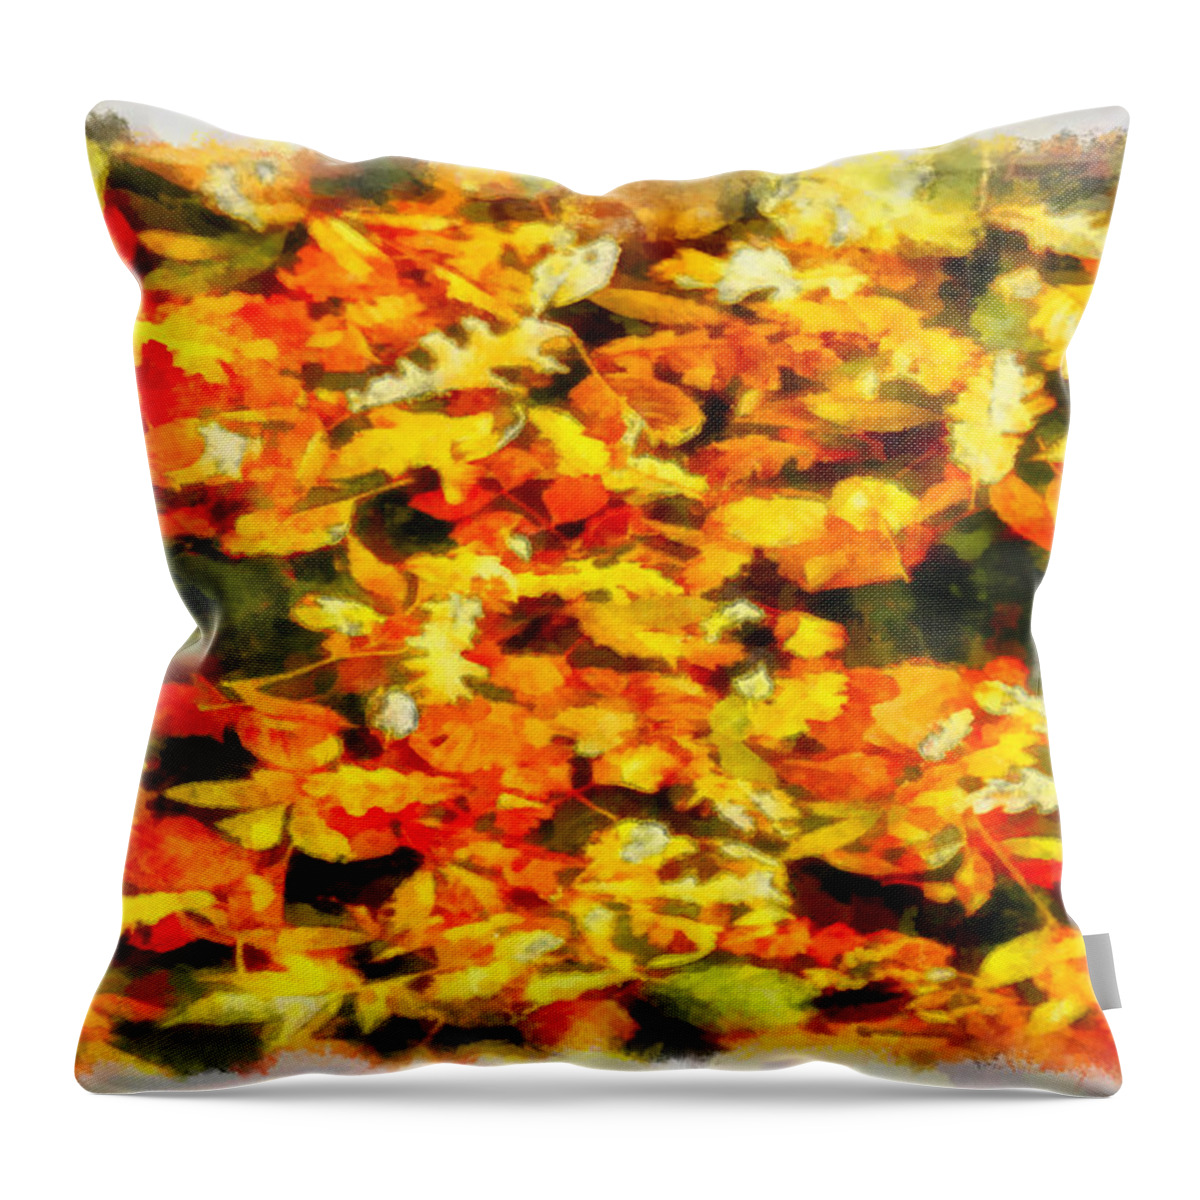 Rossidis Throw Pillow featuring the painting Autumn leaves 2 by George Rossidis